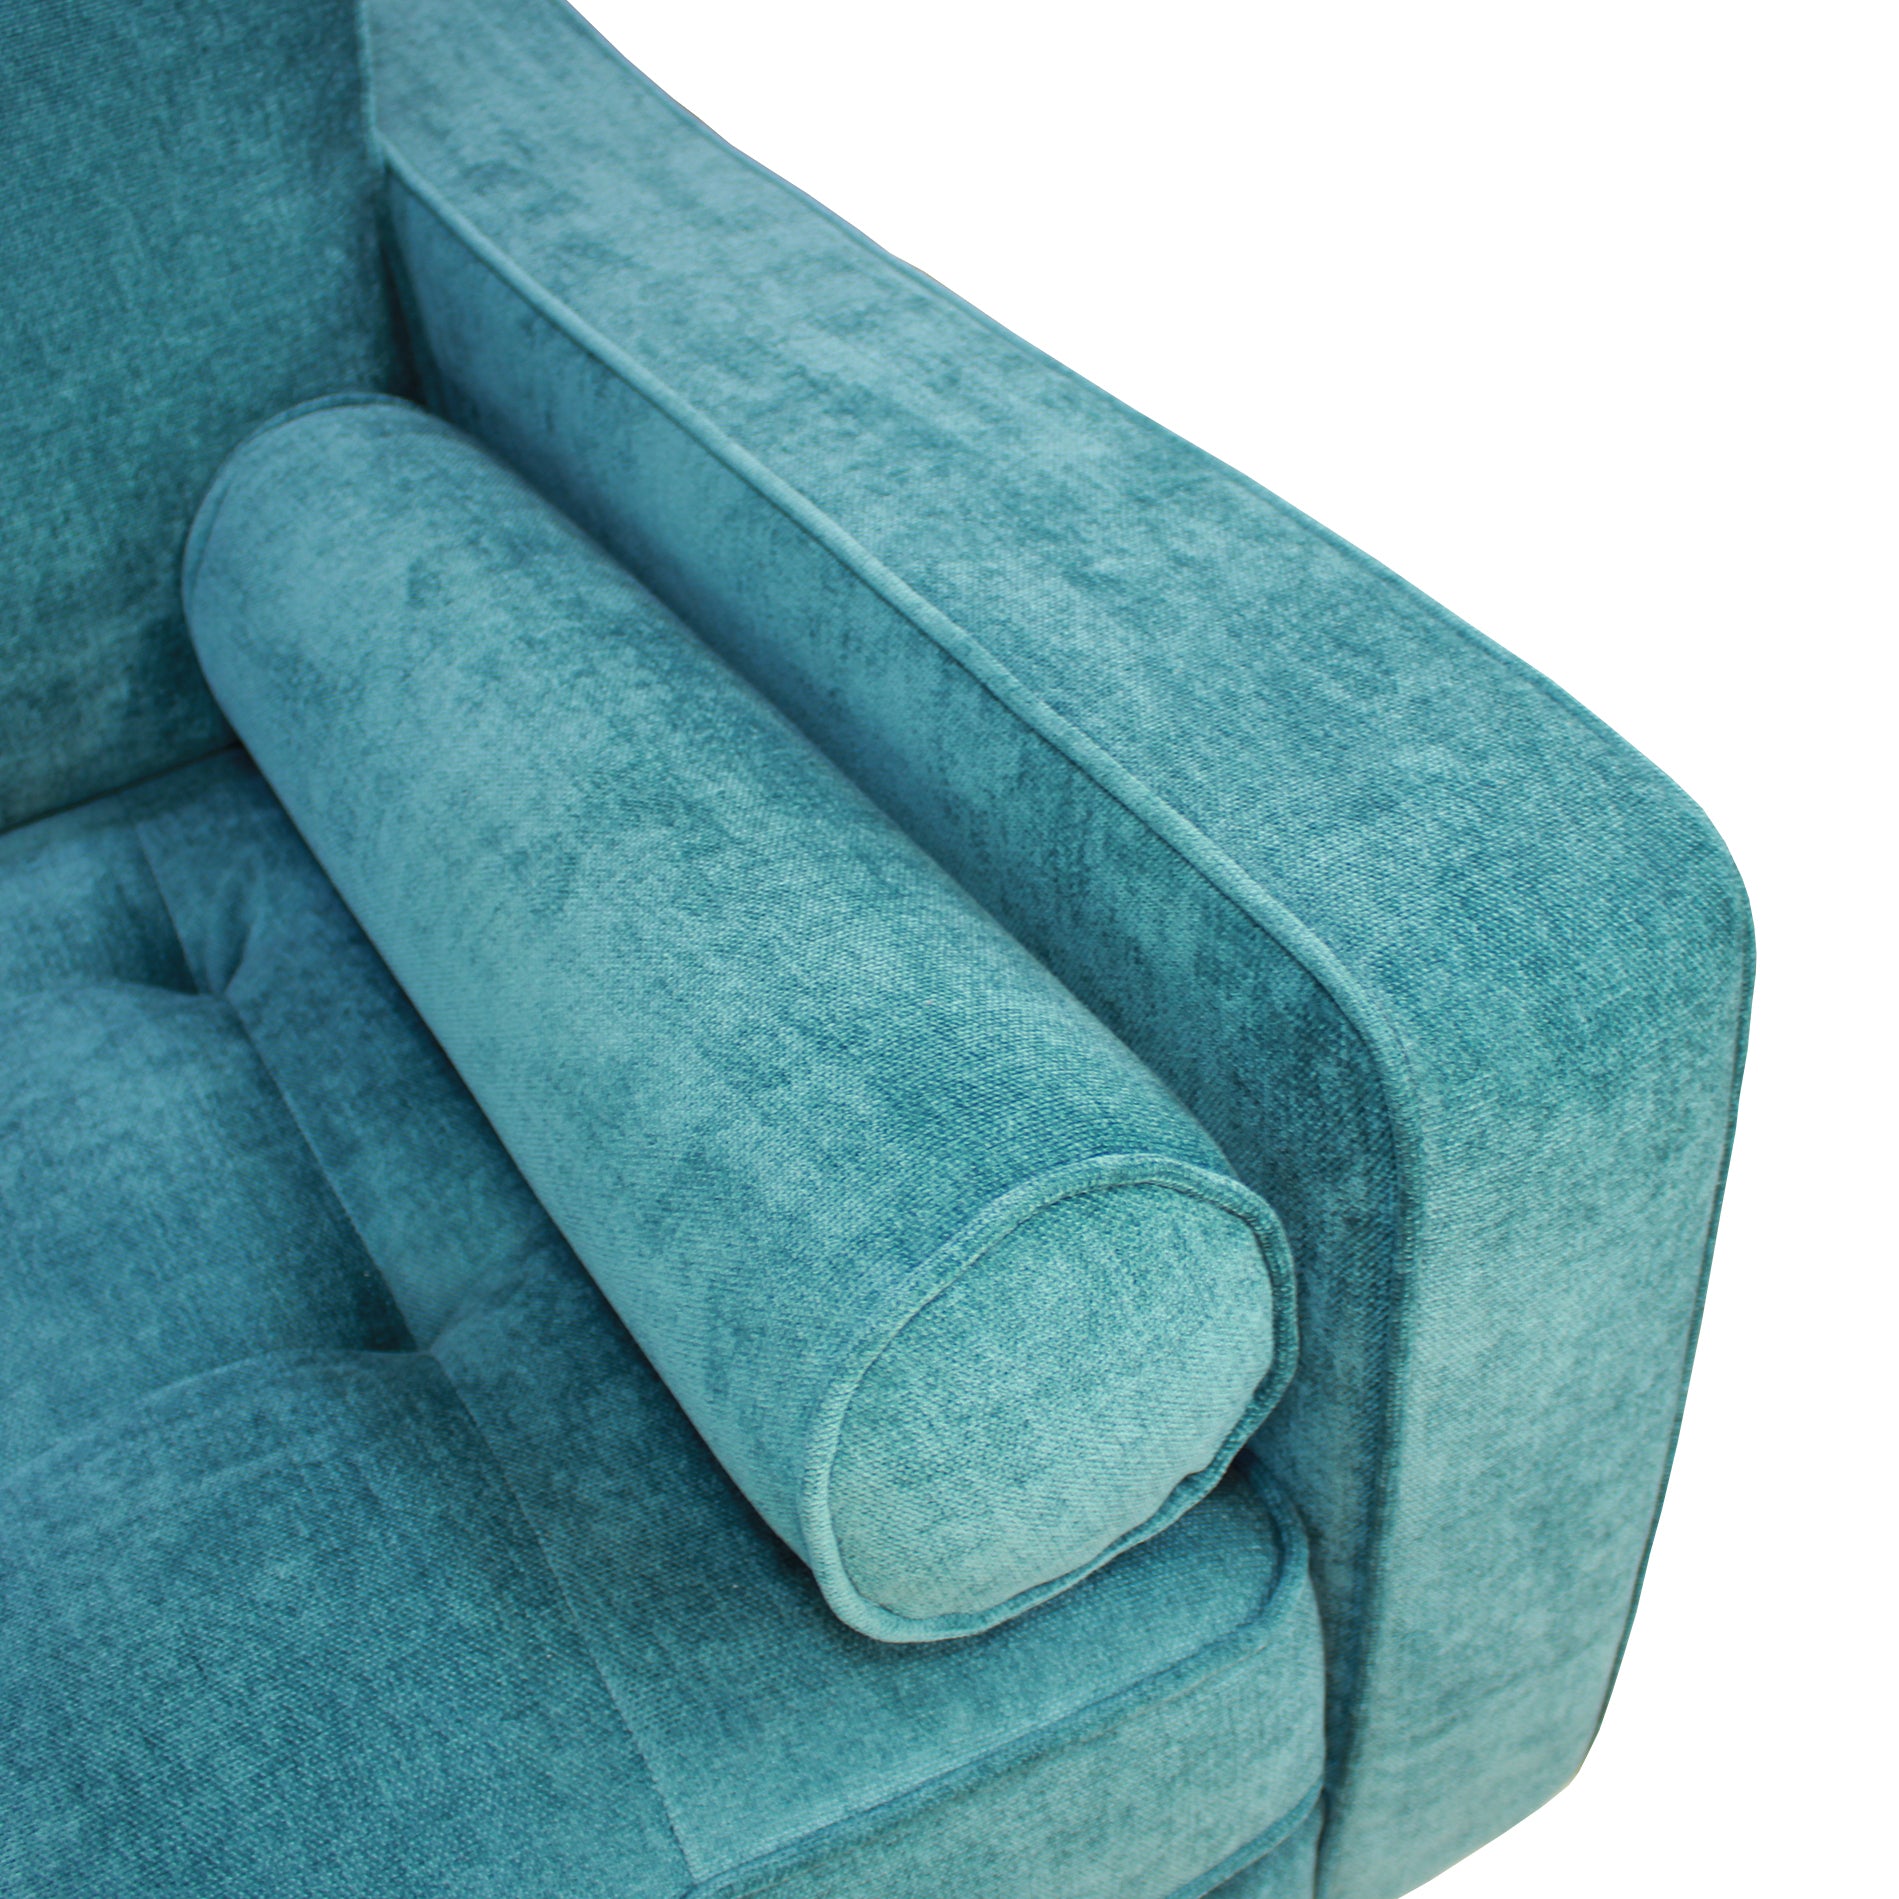 Anderson Chair Turquoise